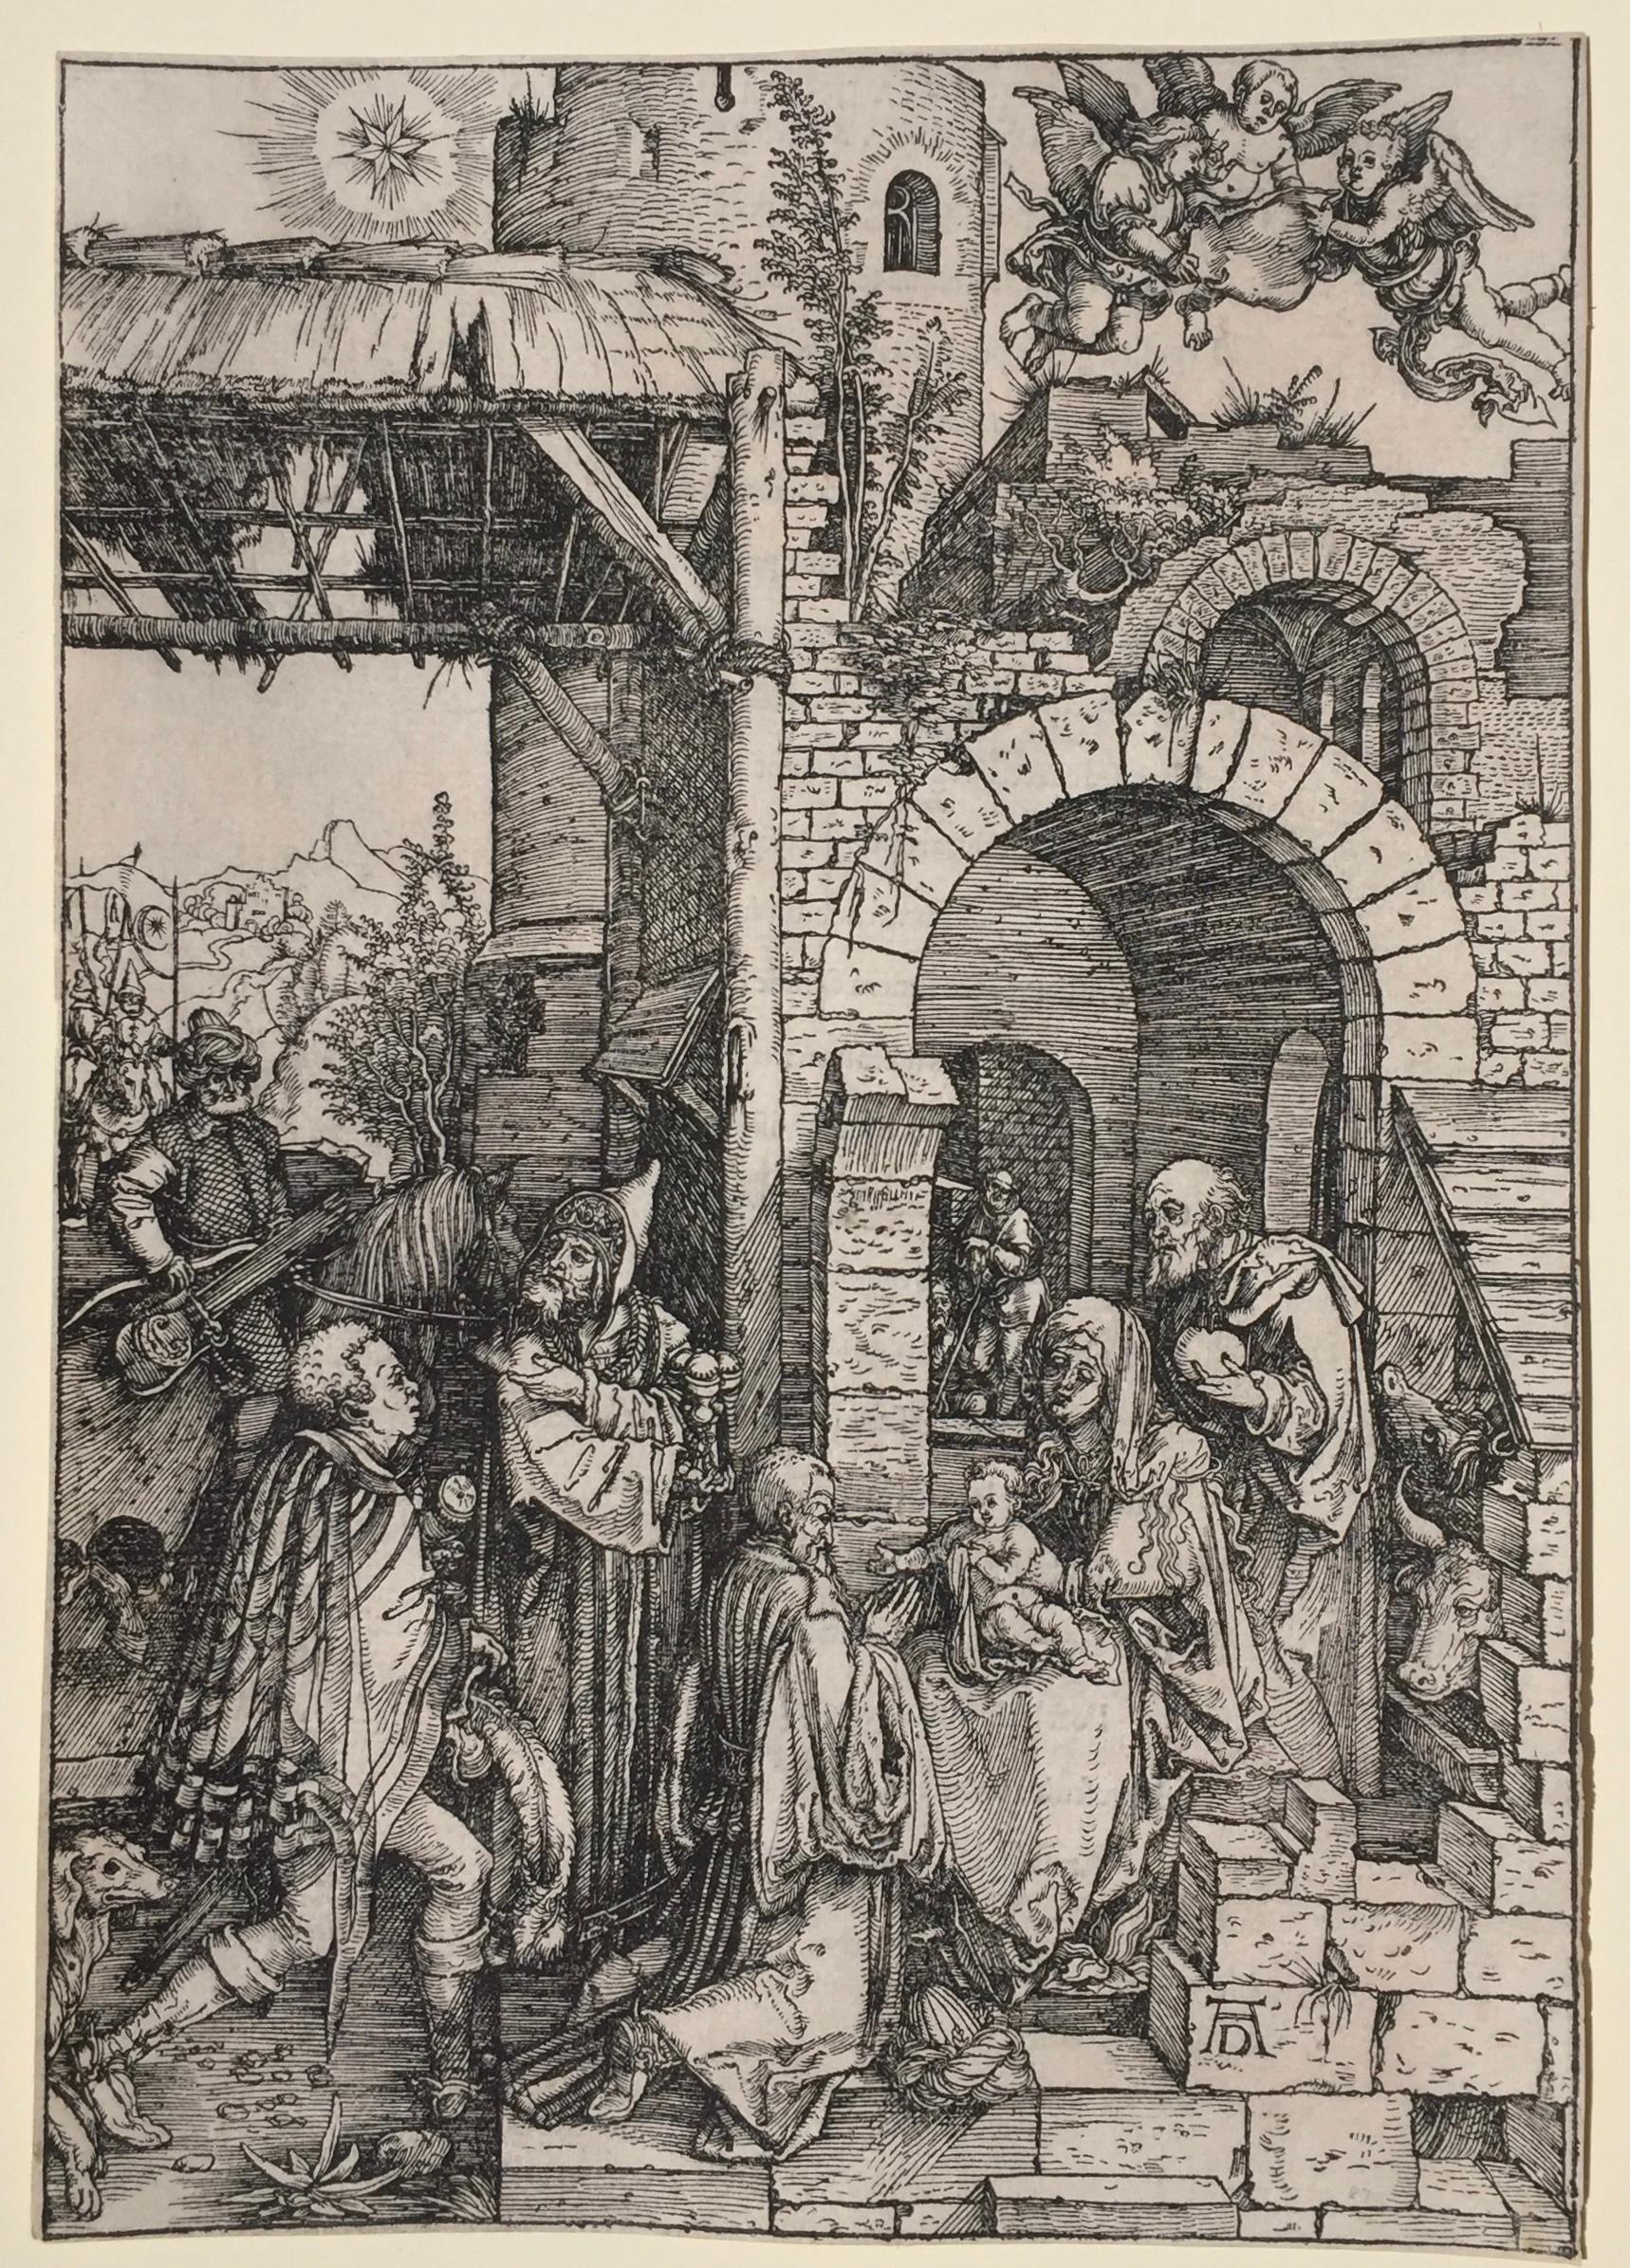 THE ADORATION OF THE MAGI - from Life of the Virgin (see also posted M Raimondi) - Print by Albrecht Dürer